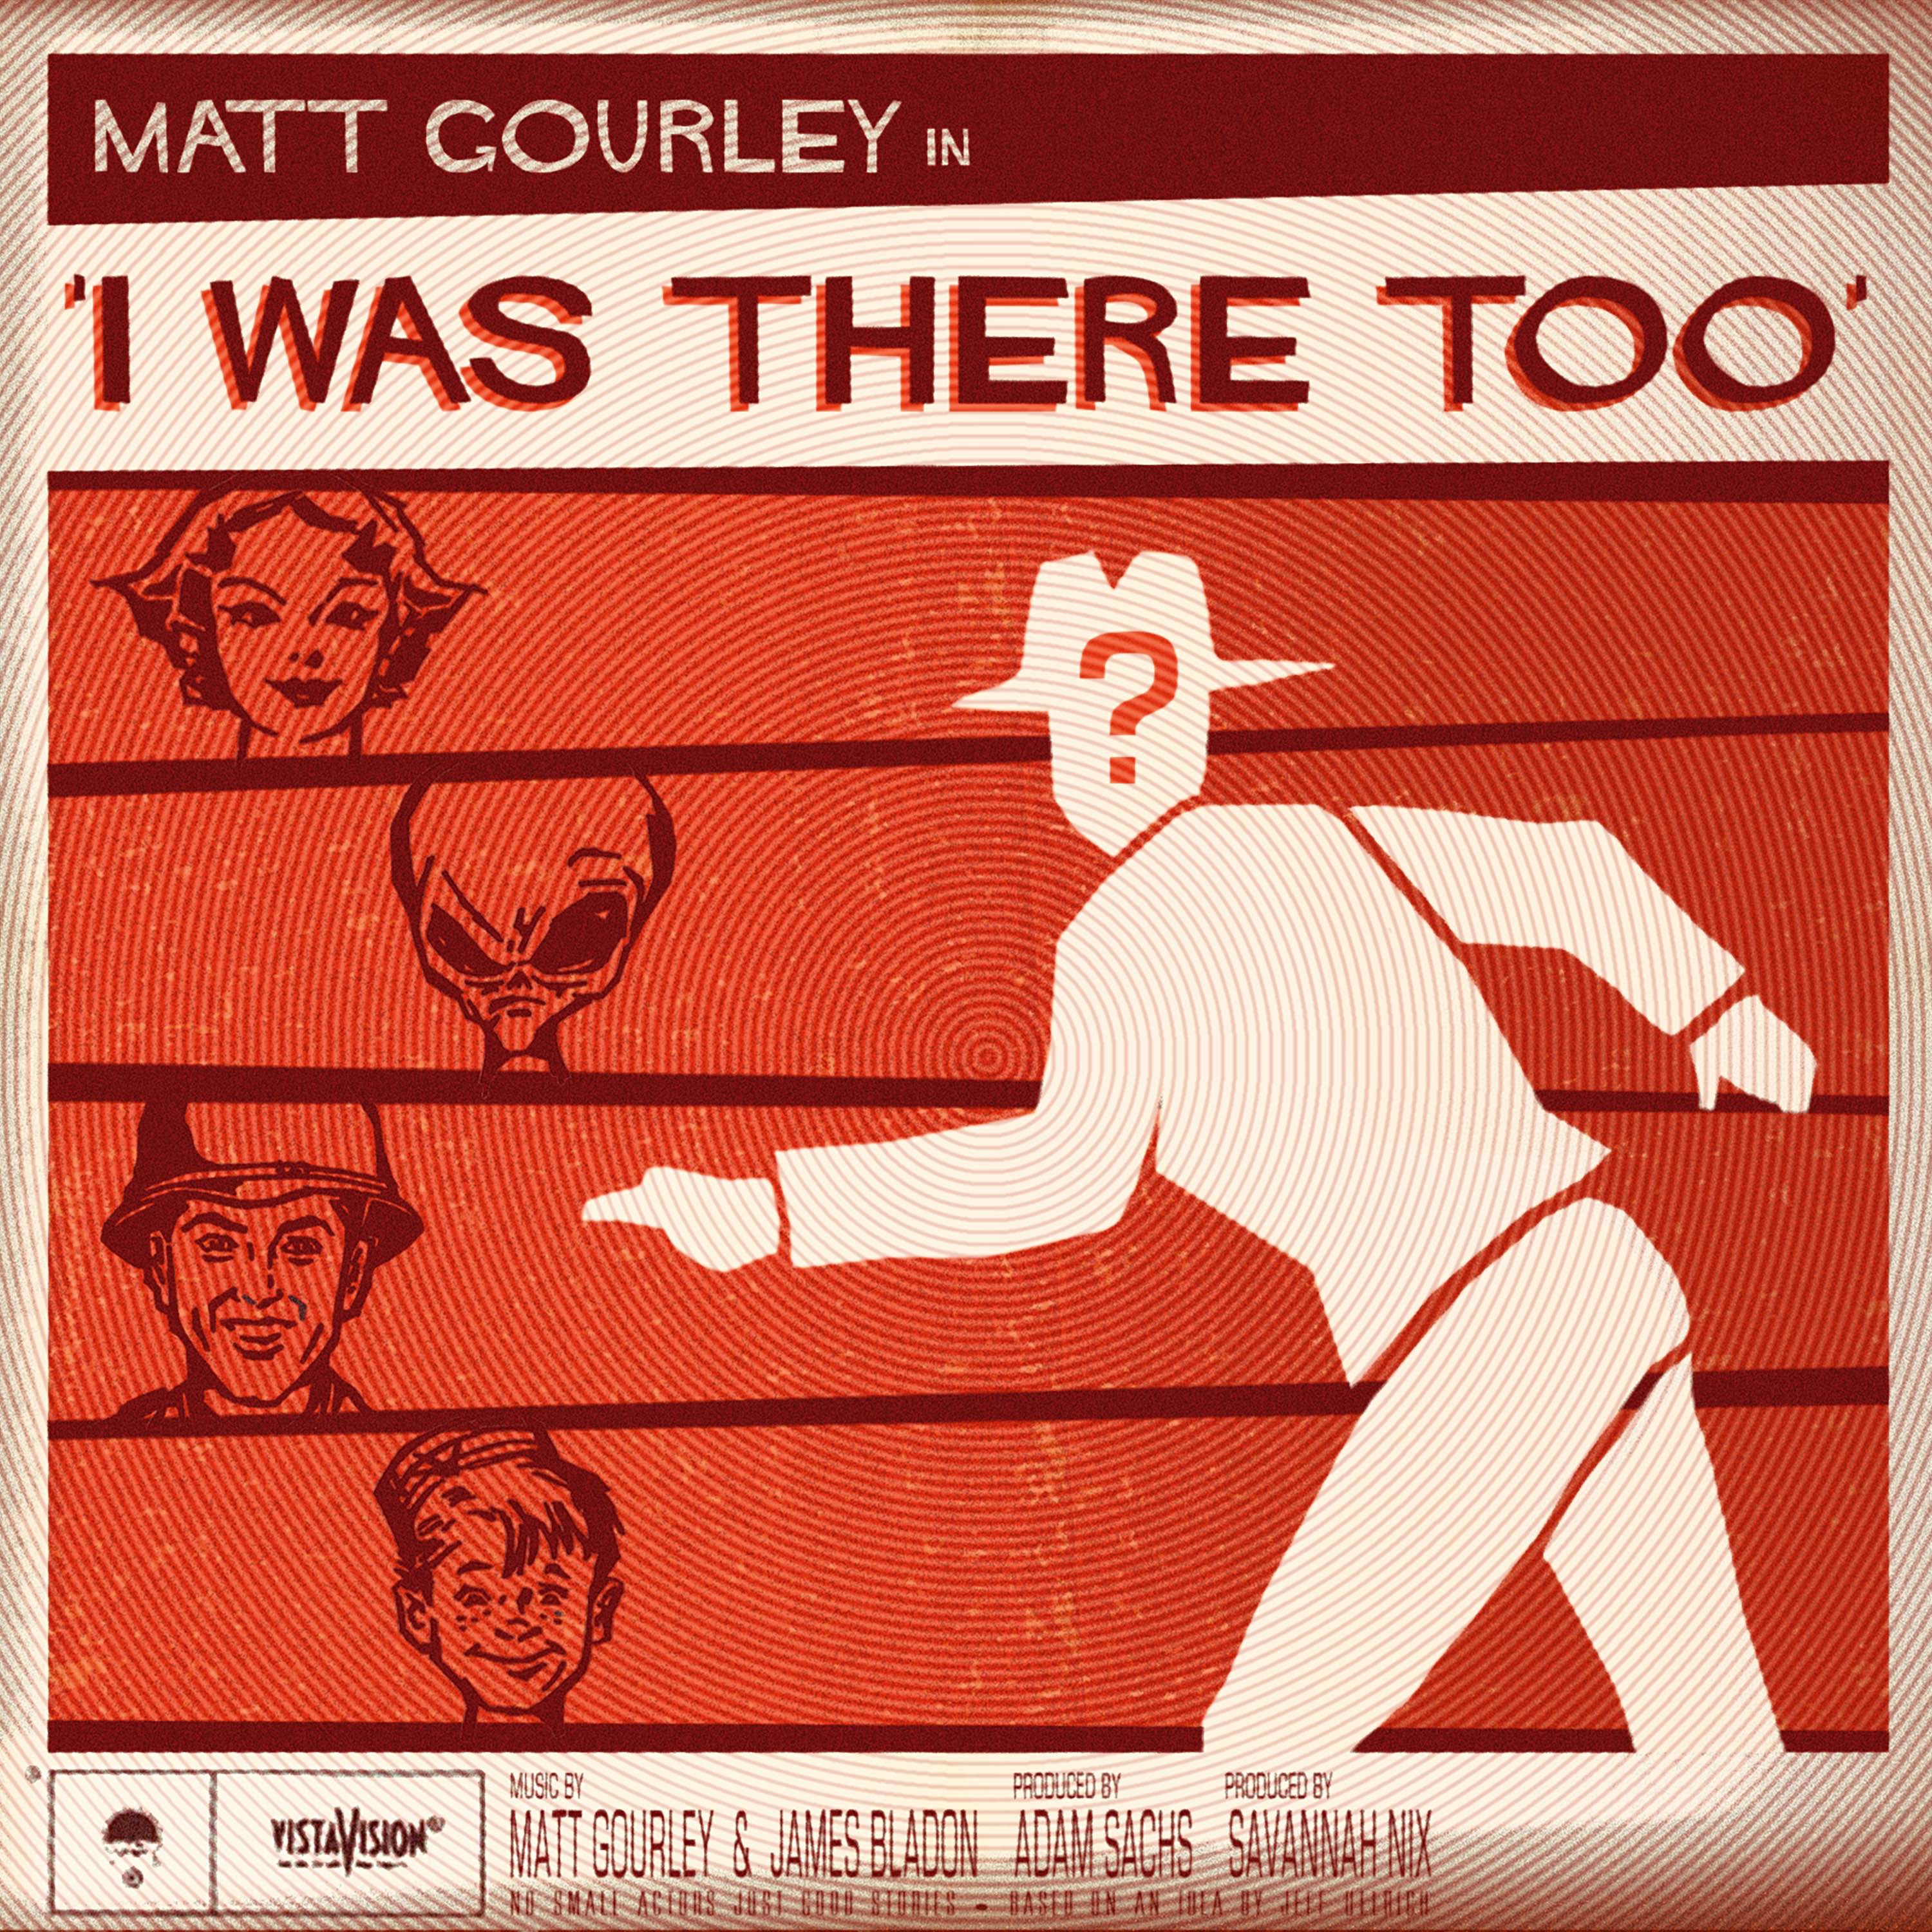 I Was There Too:Matt Gourley